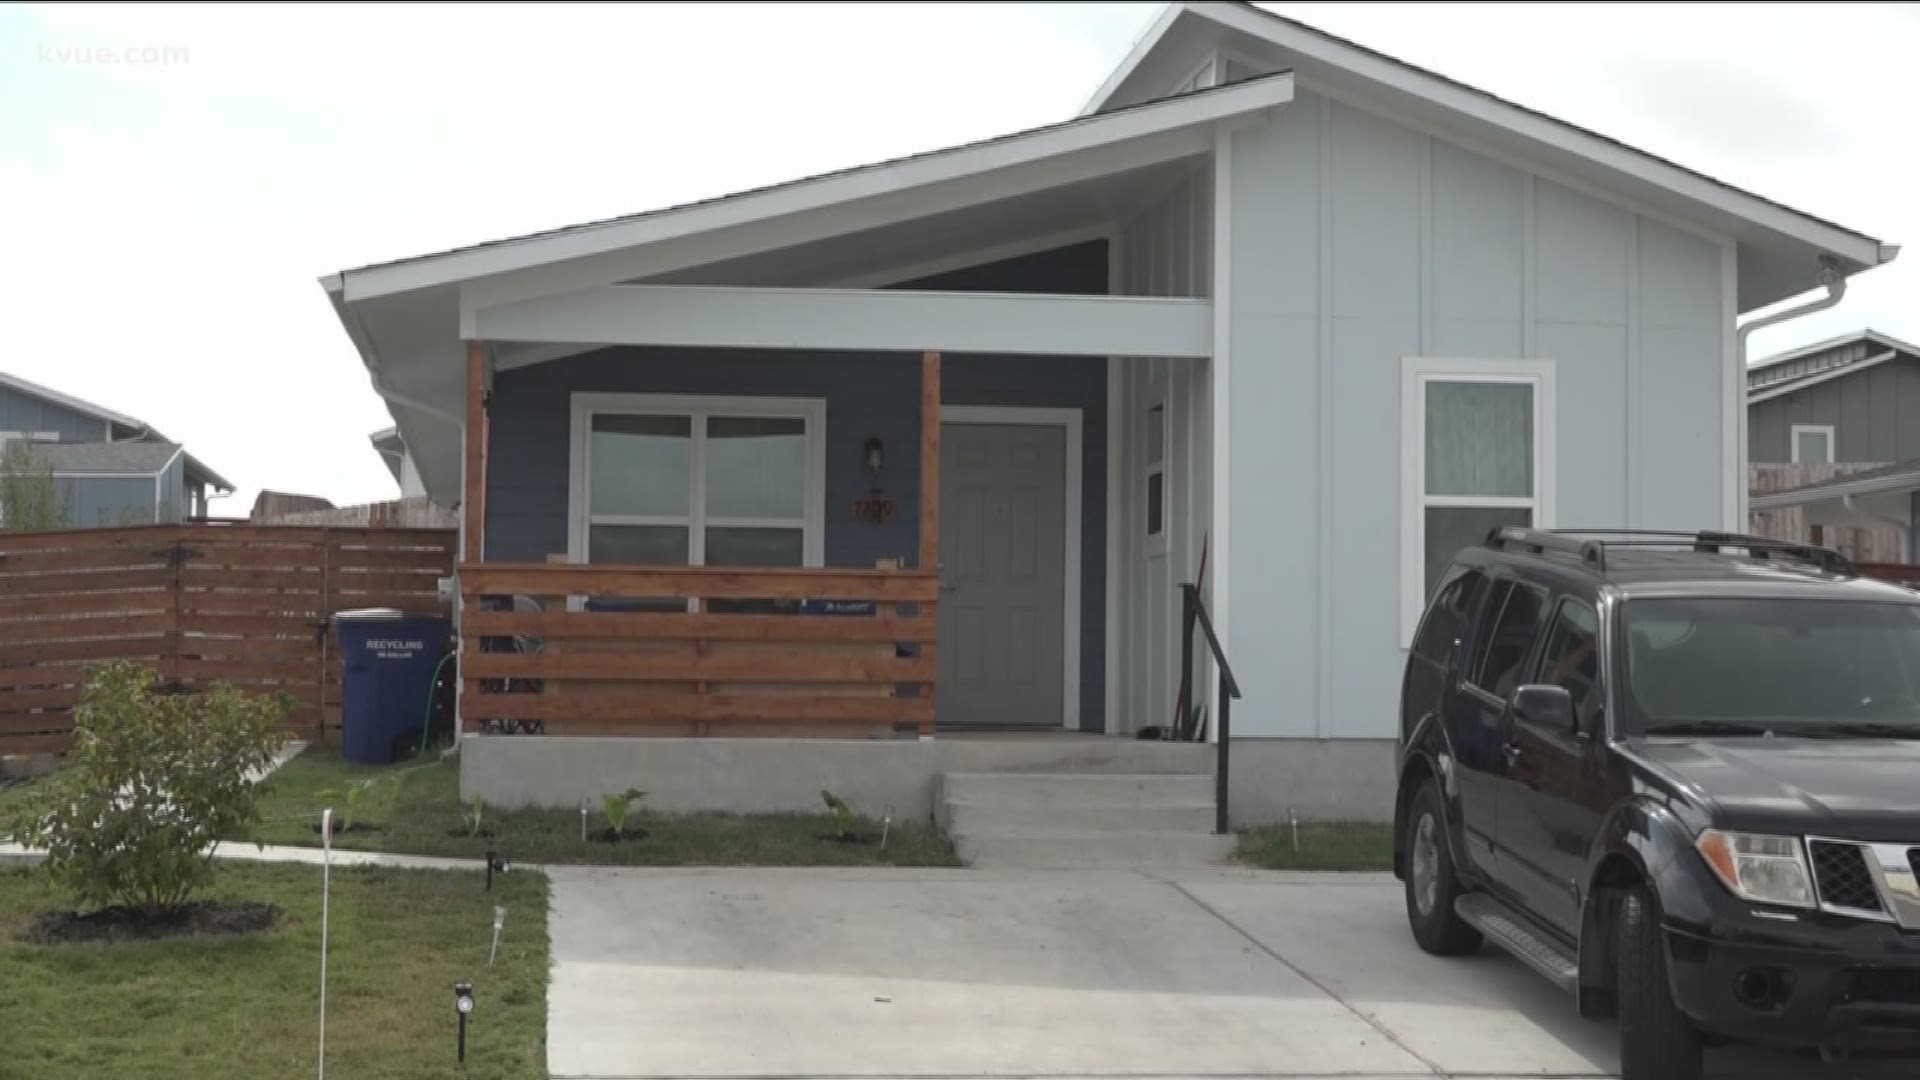 Austin Habitat for Humanity is building more affordable housing in East Austin.